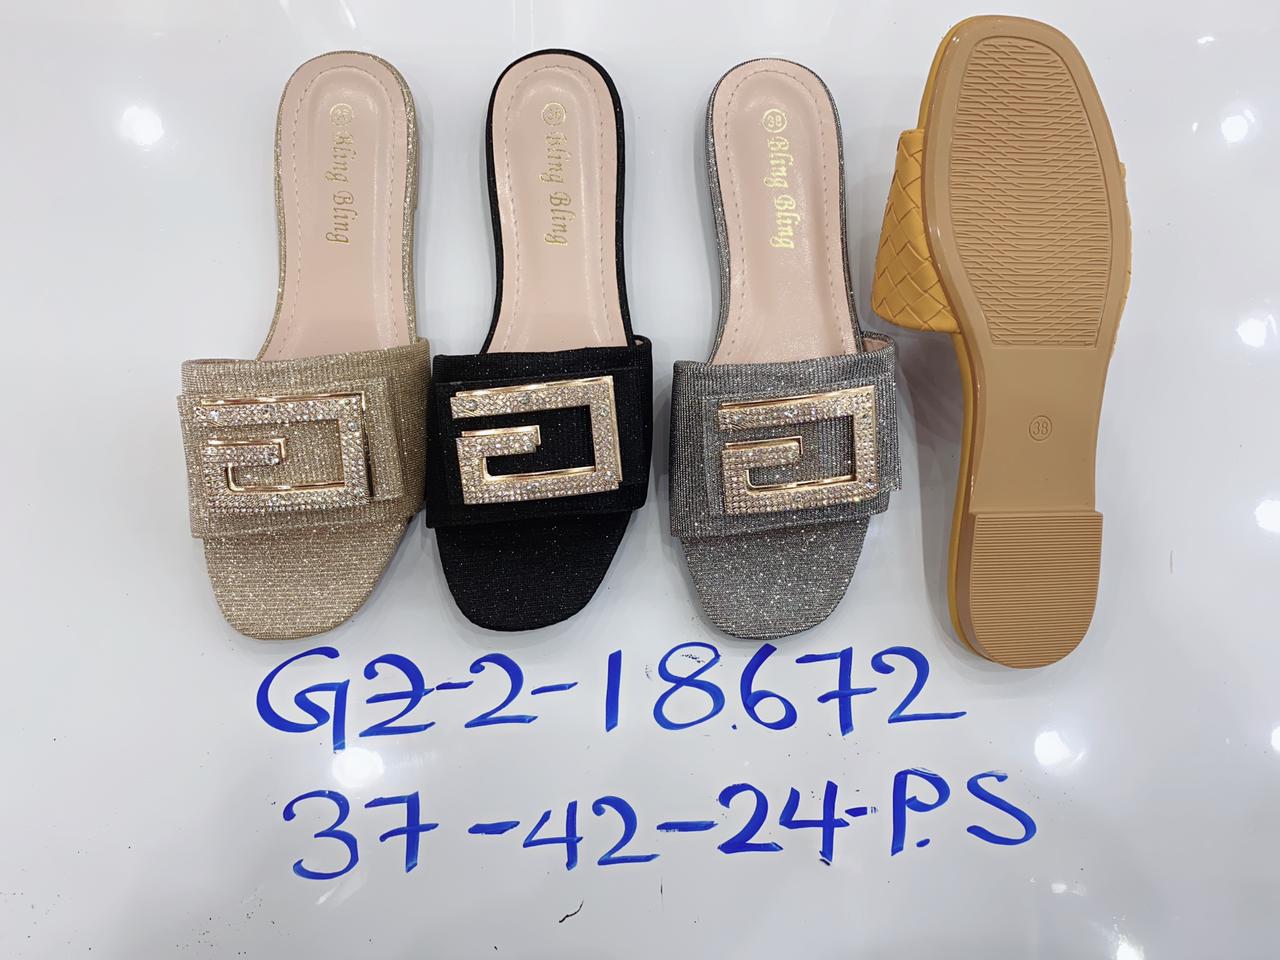 Where To Buy Dubai Shoes At Wholesale Price In Nigeria - Business - Nigeria